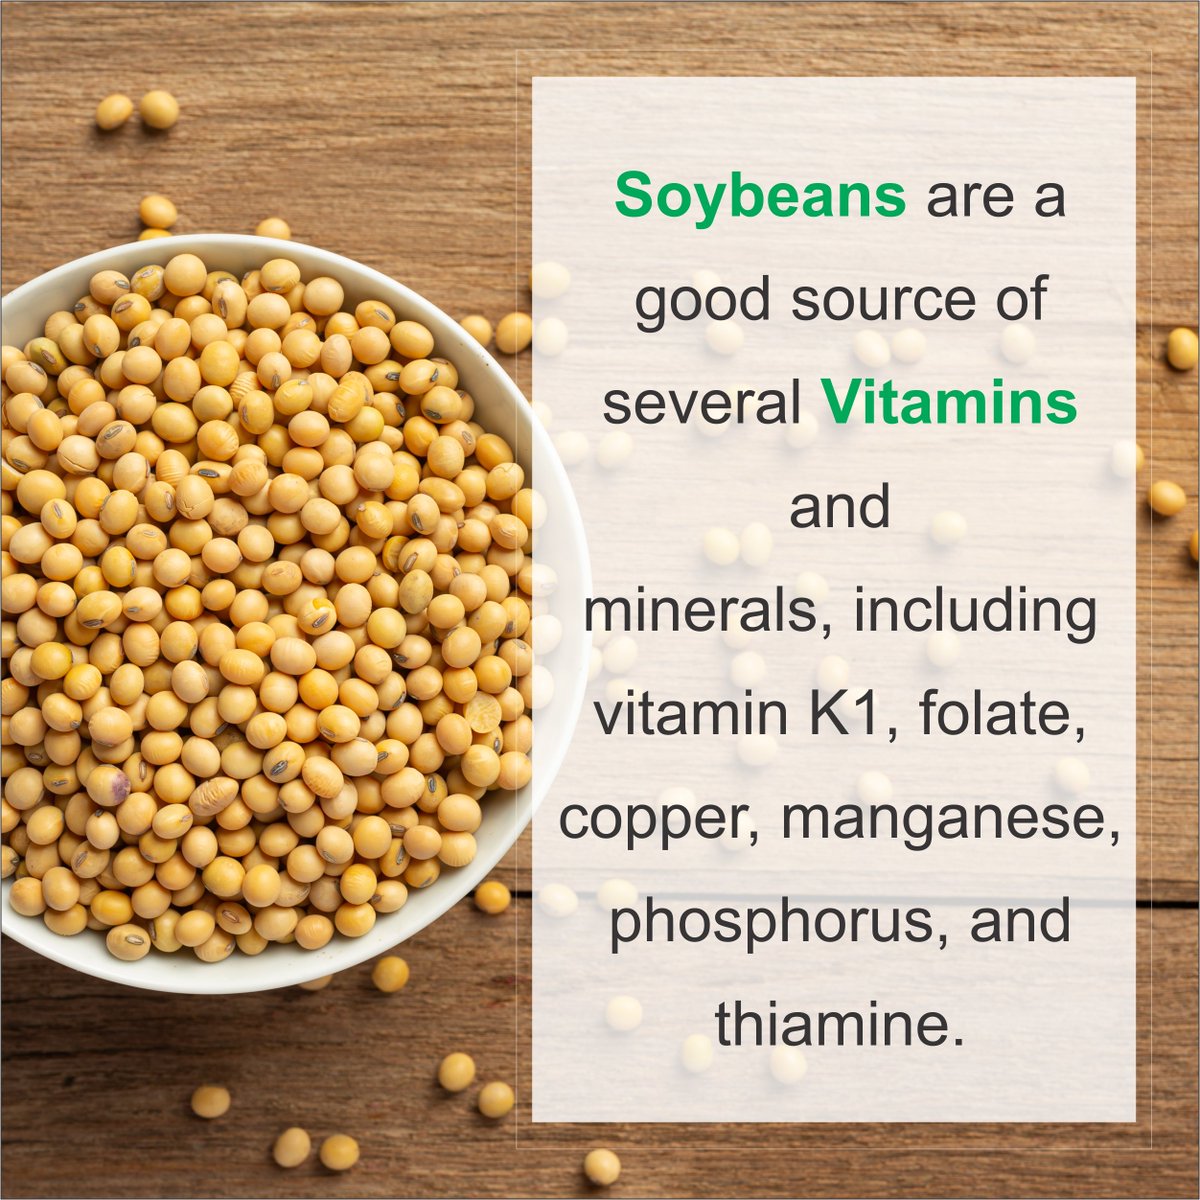 It is good for your health to eat soybeans. 
Source: iisrindore.icar.gov.in/fooduses.html
.
 #soyfood #vezlay
#dailydiet #goodfat #protiens #foodfunda #nutritionmatters #welovepeanut #loveforfood
#dailydiet #dietandfitness #nutrition #dietandexercise #healthyliving #healthyeating